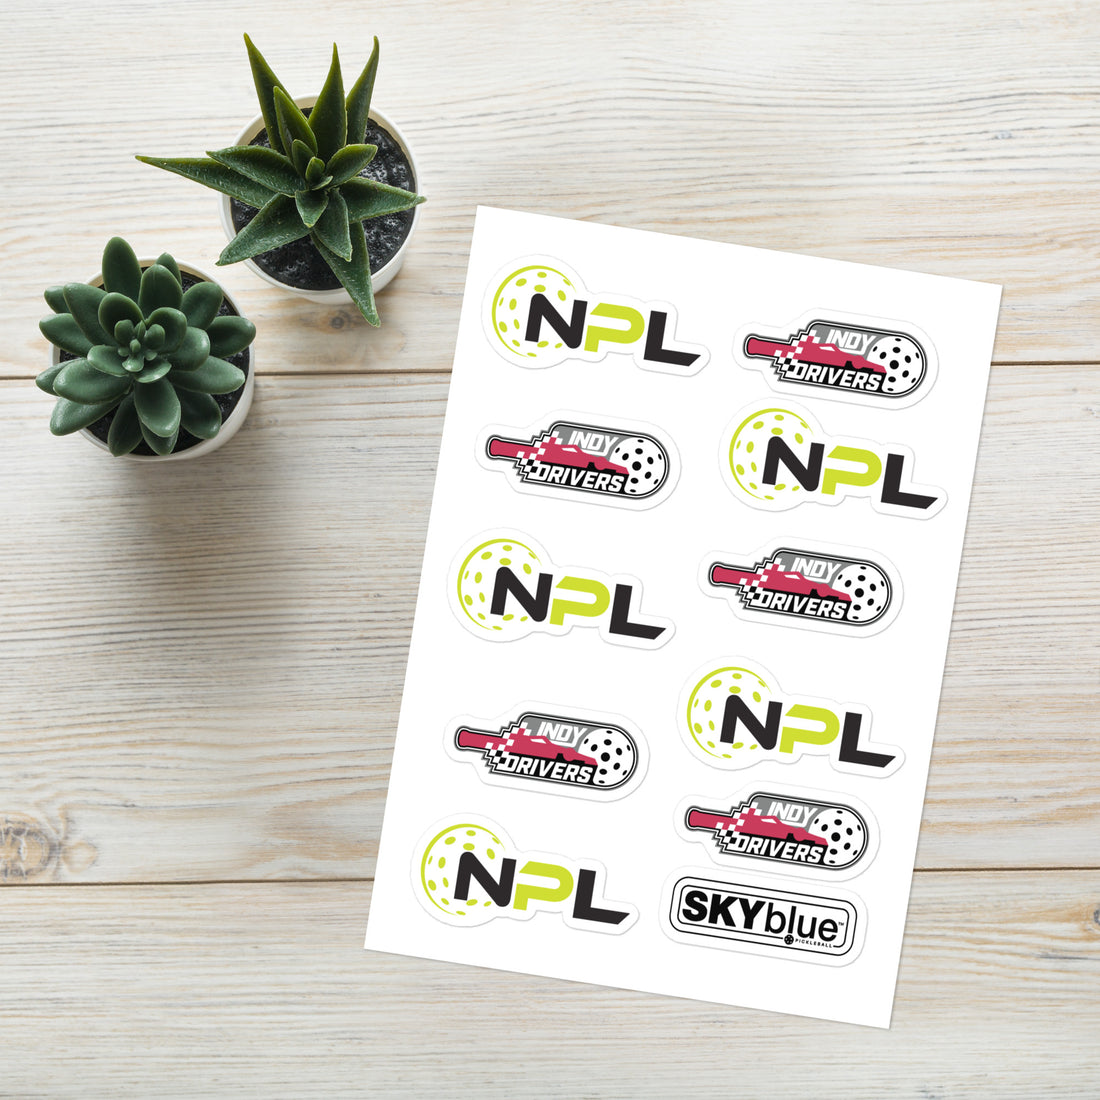 Indy Drivers™ - NPL™ National Pickleball League Stickers